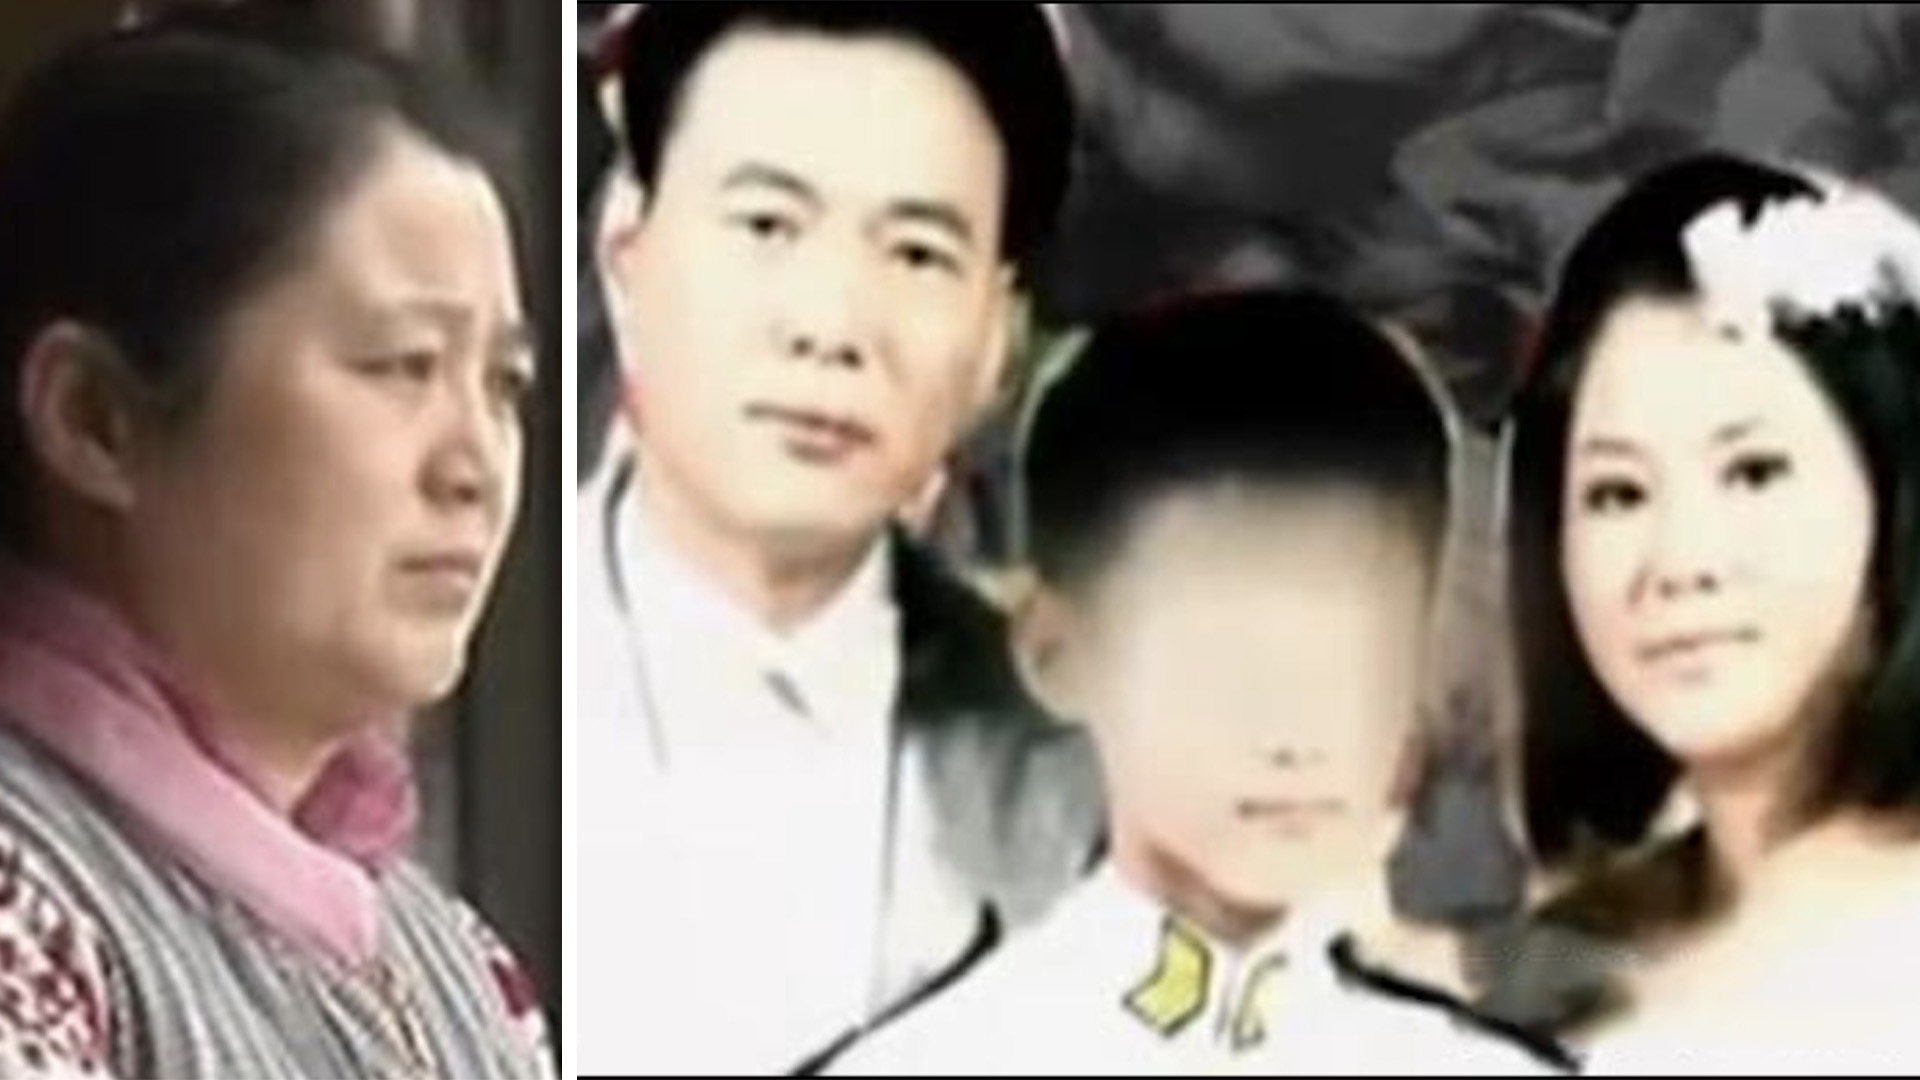 The story of a woman who was told 17 years ago that her baby had died by relatives, who then stole the child, has found her son in a case that has shocked China. Photo: SCMP composite